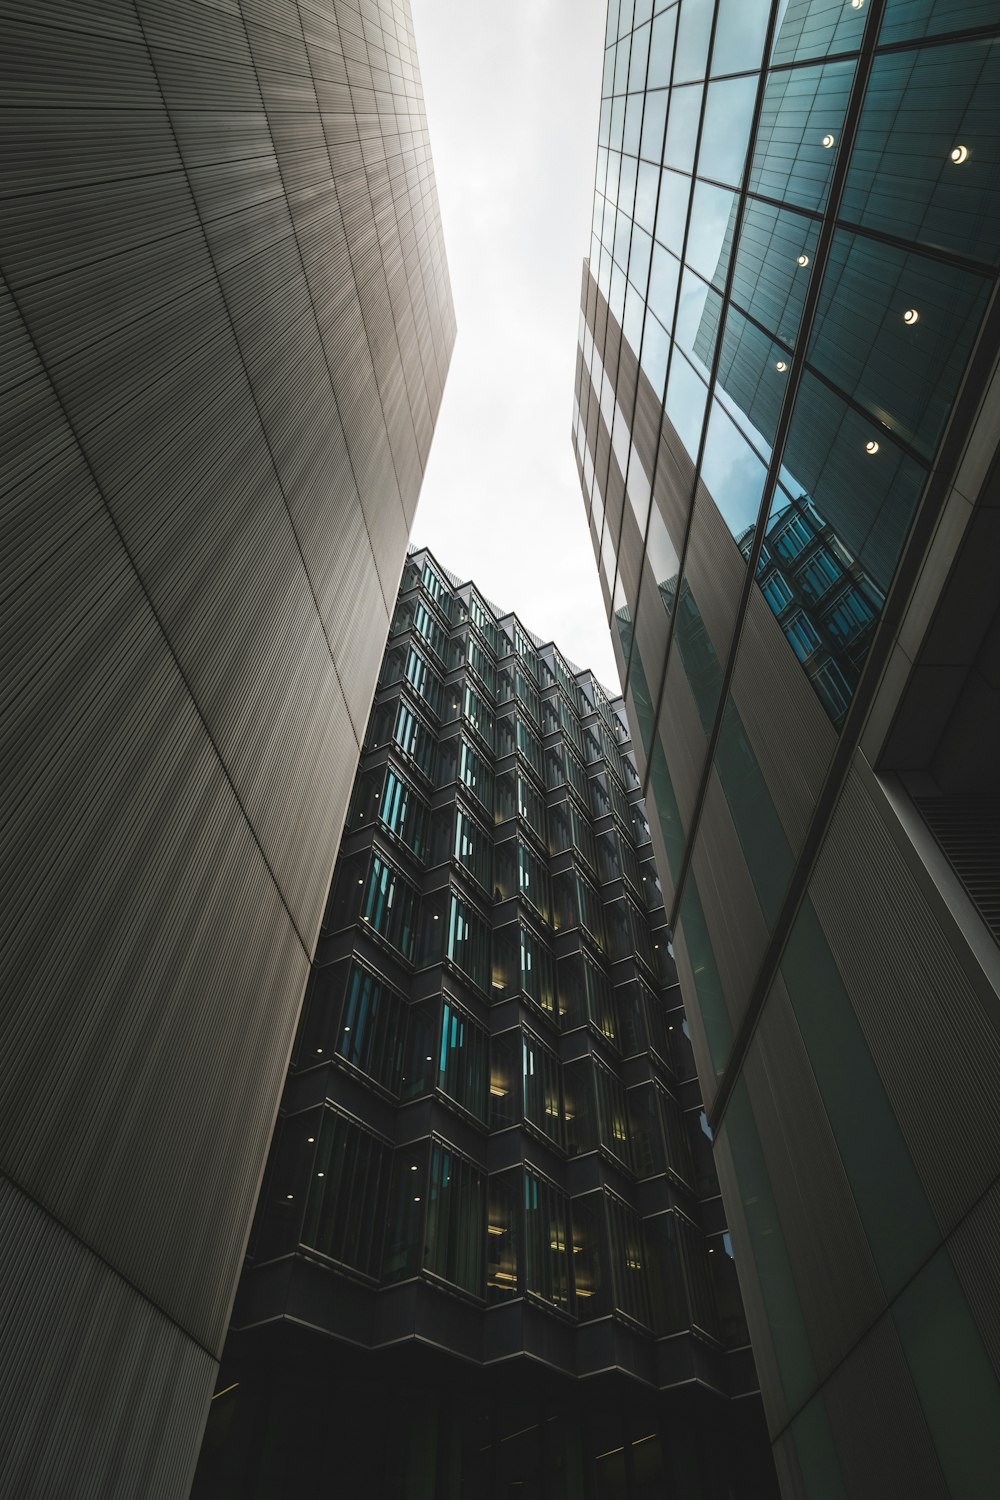 looking up at a tall building in a city